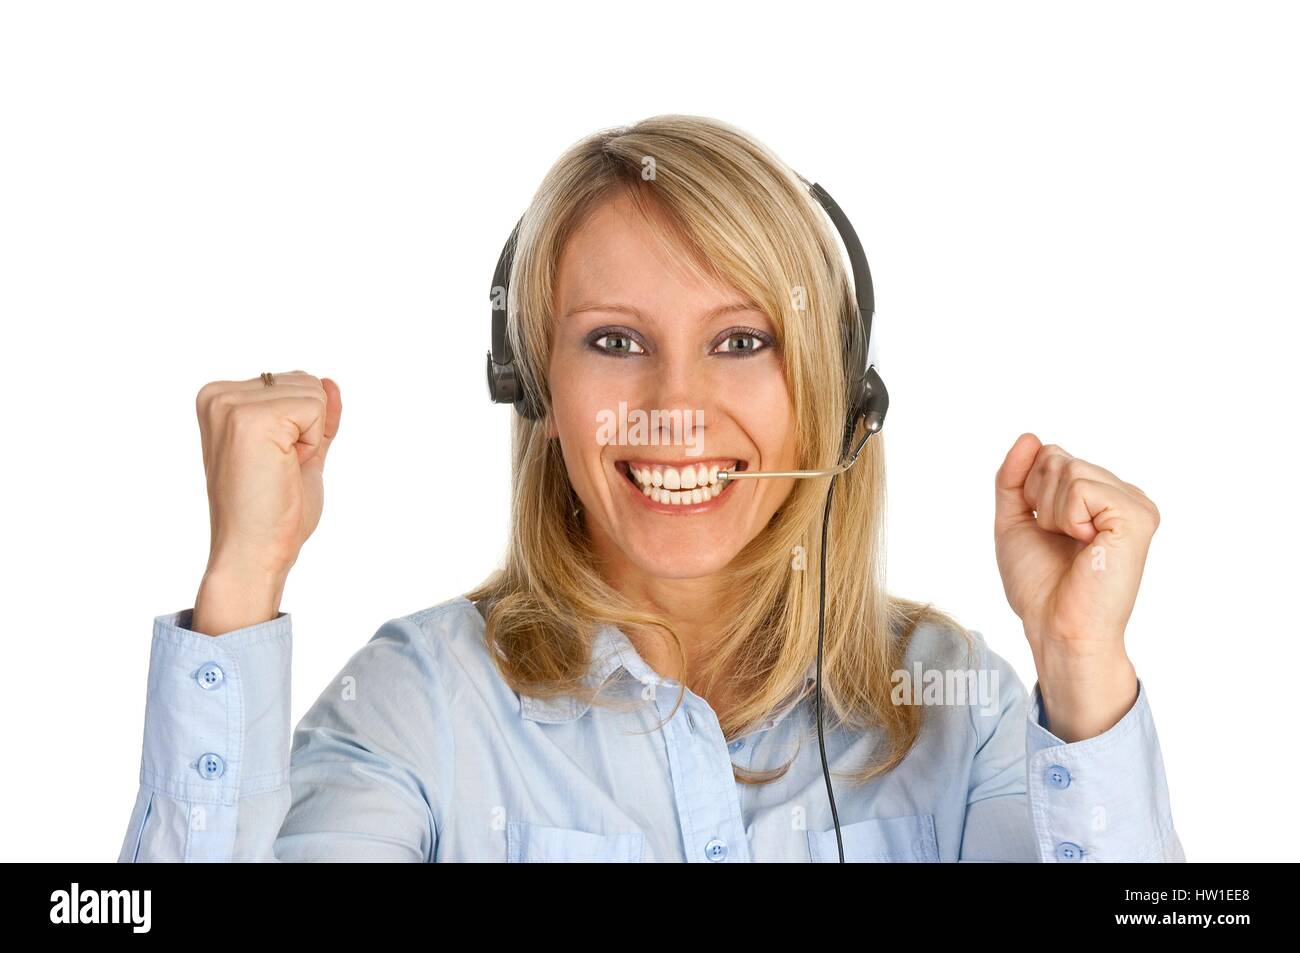 Woman with Headset, Frau mit Headset Stock Photo